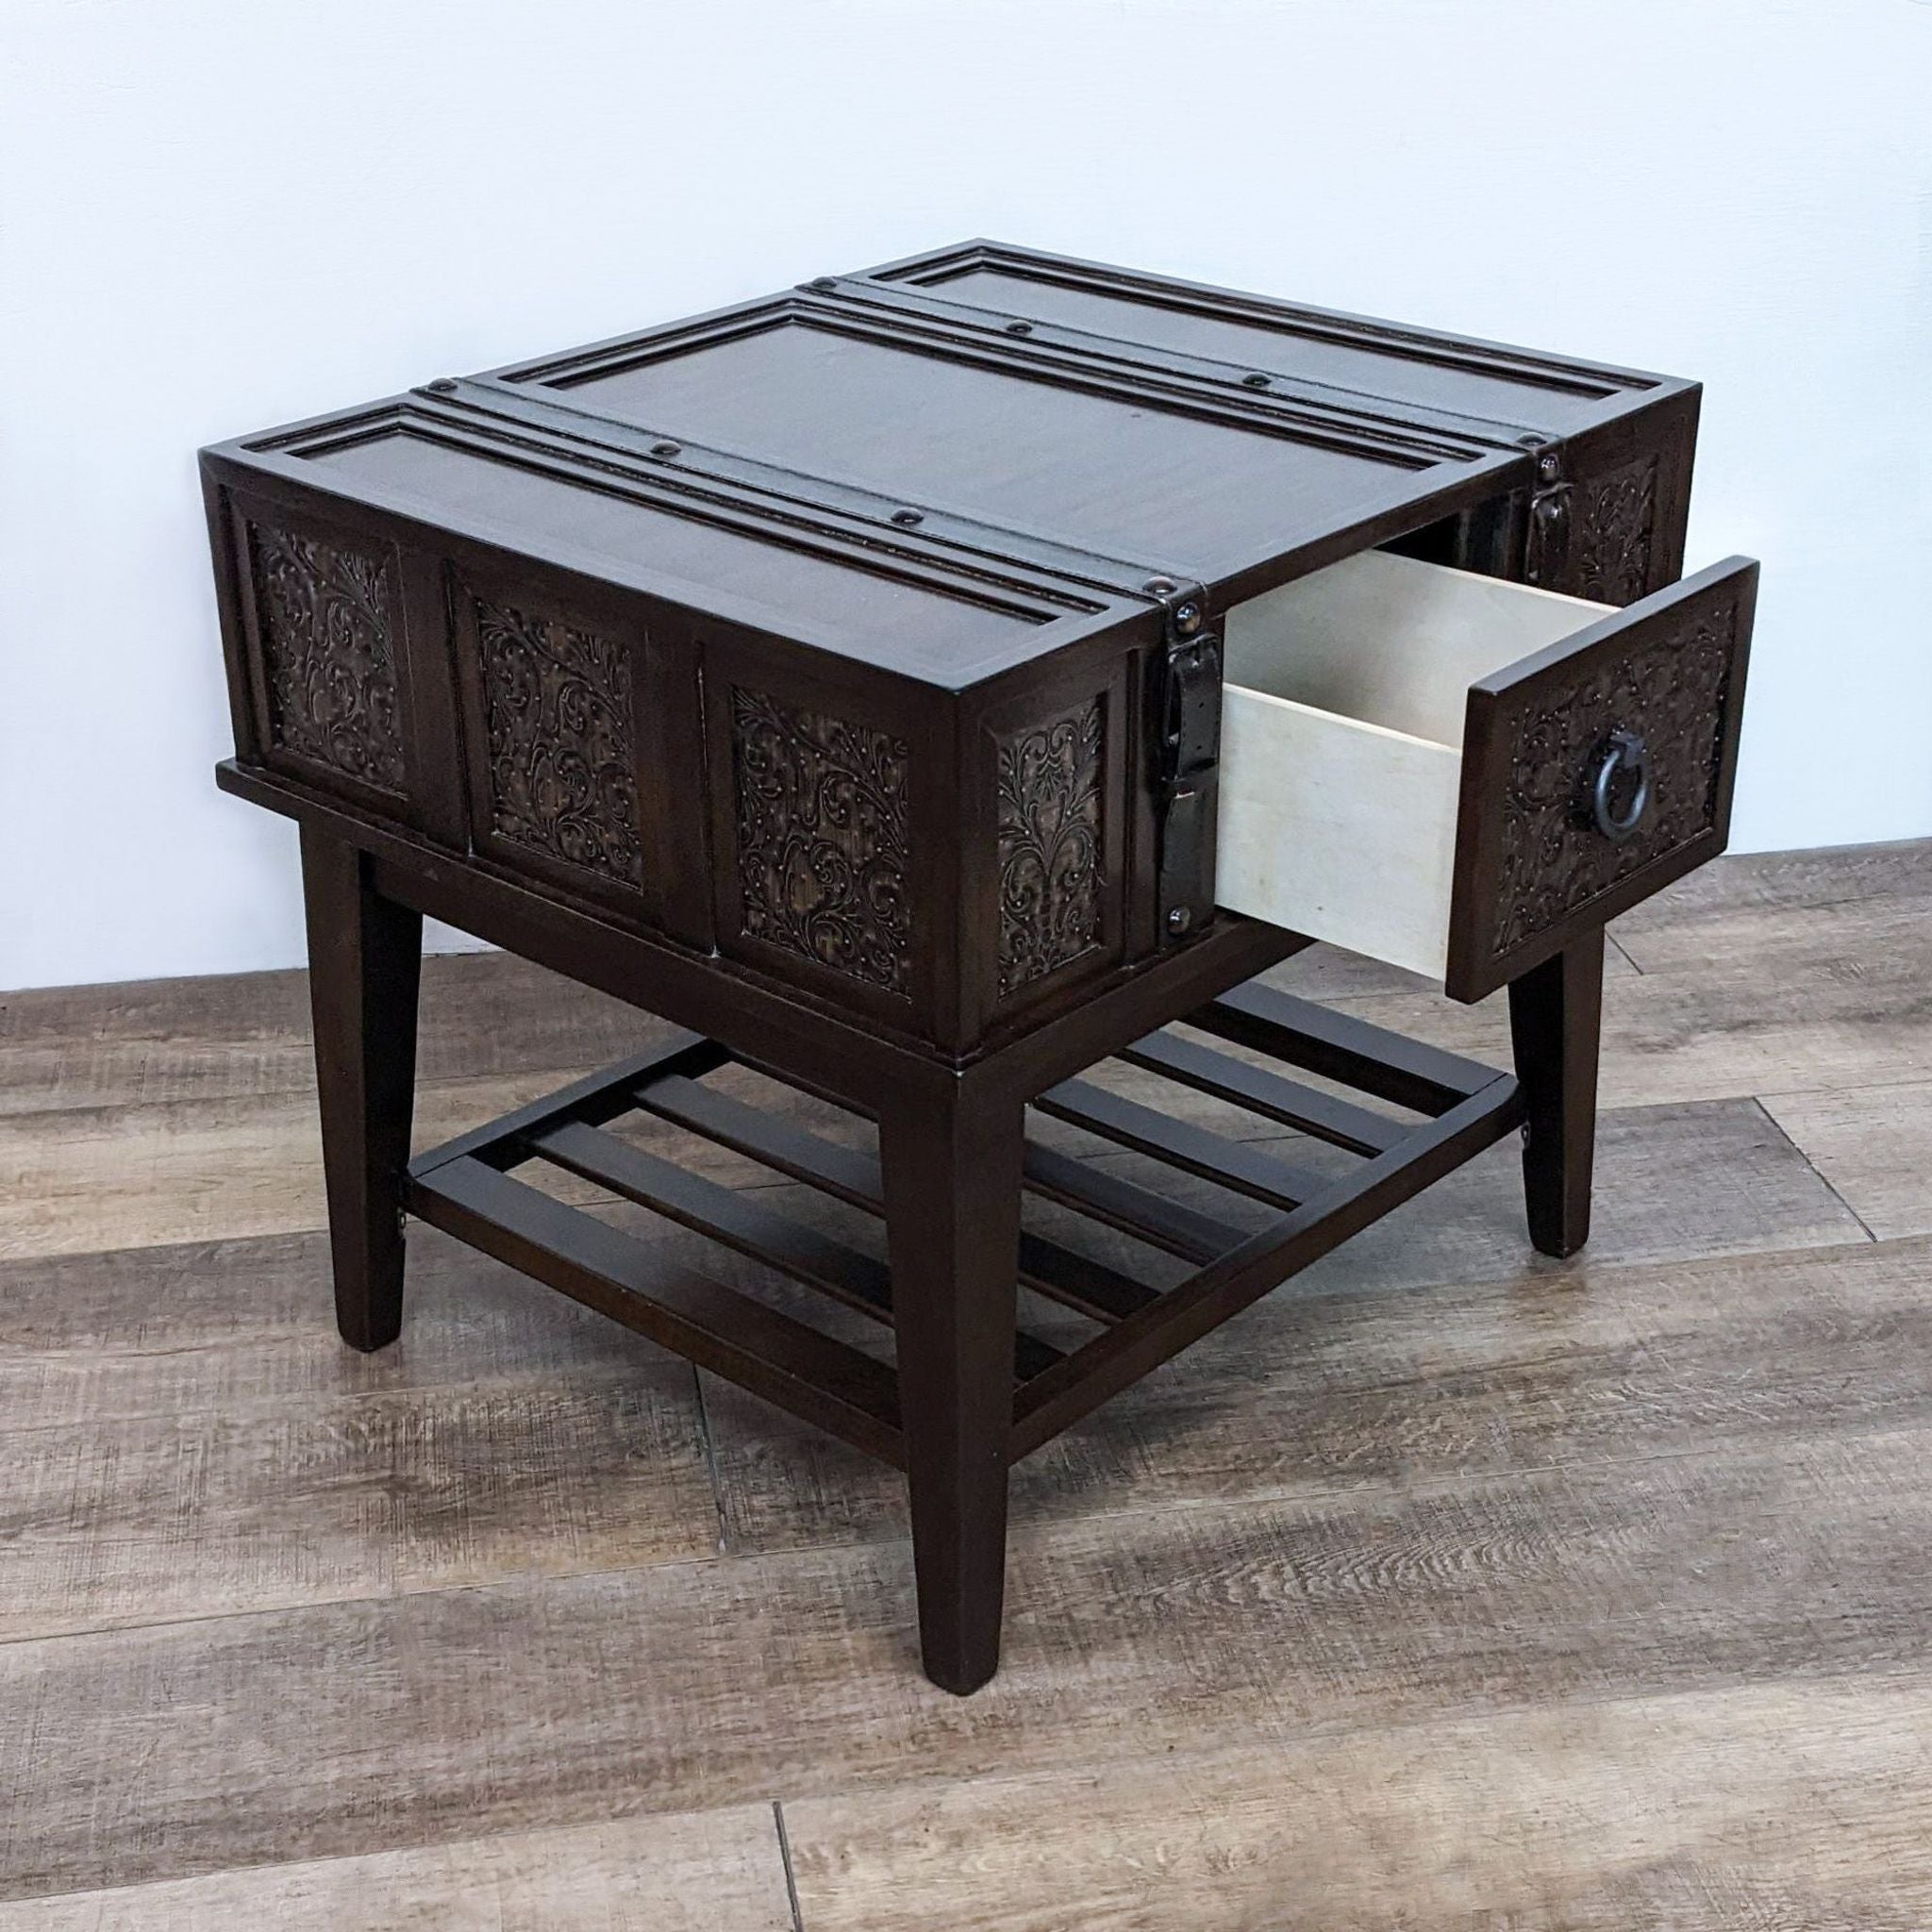 Open drawer on a Reperch end table showcasing ornate design and interior, with leather straps and slatted lower shelf.